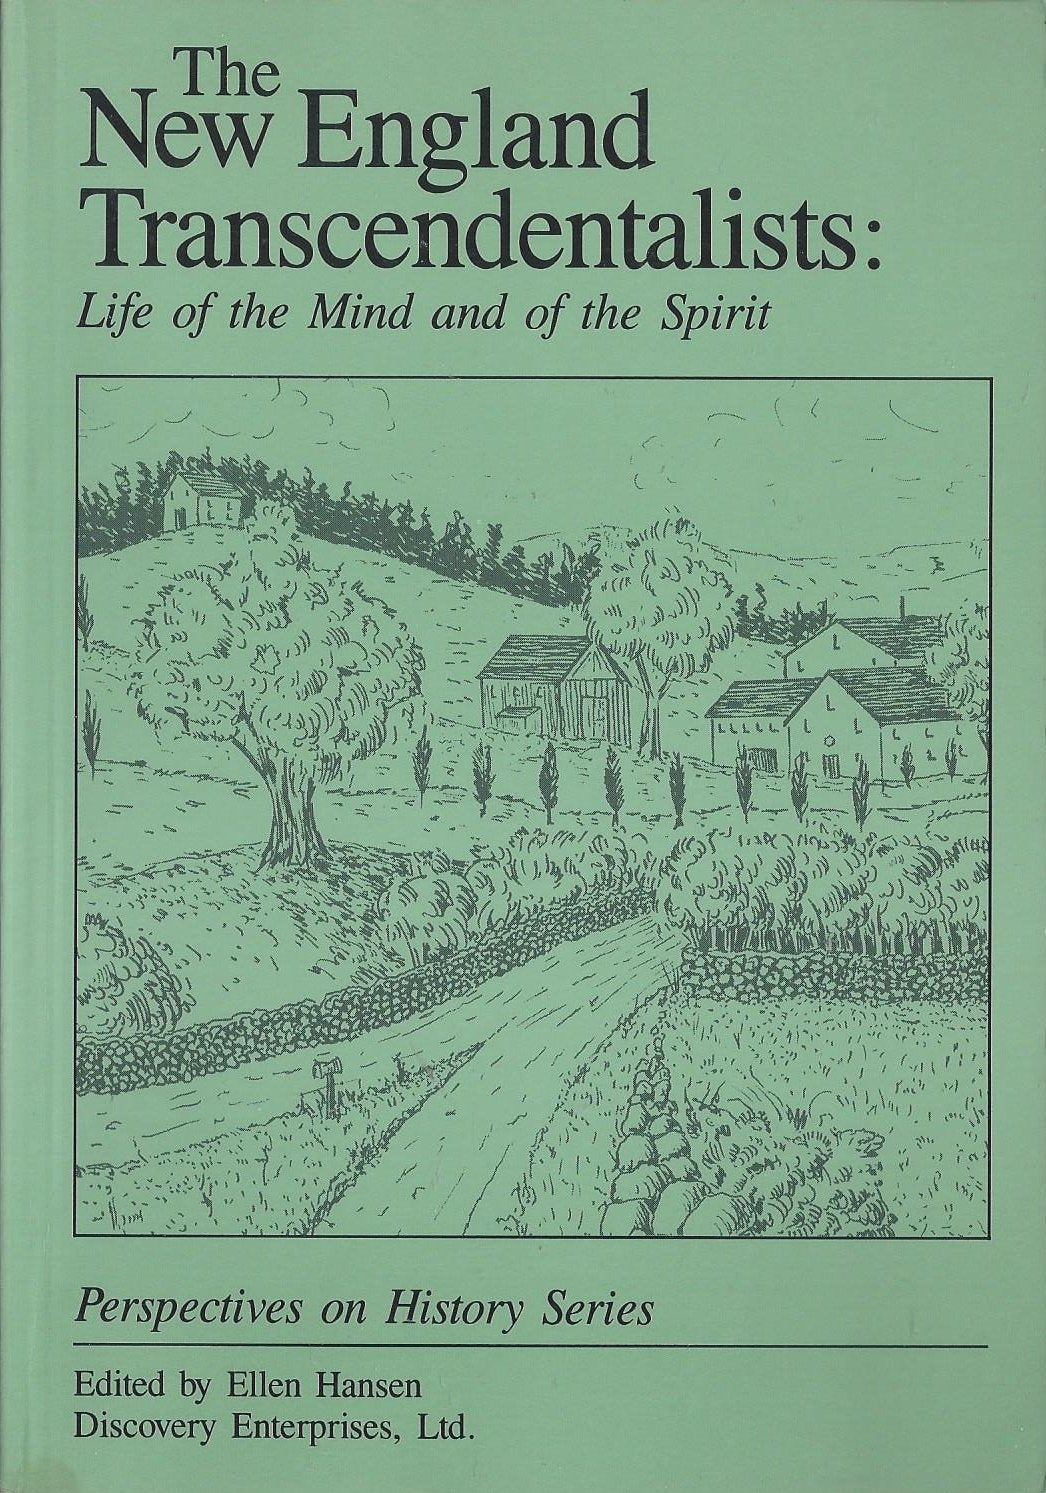 New England Transcendentalists: Life of the Mind and of the Spirit